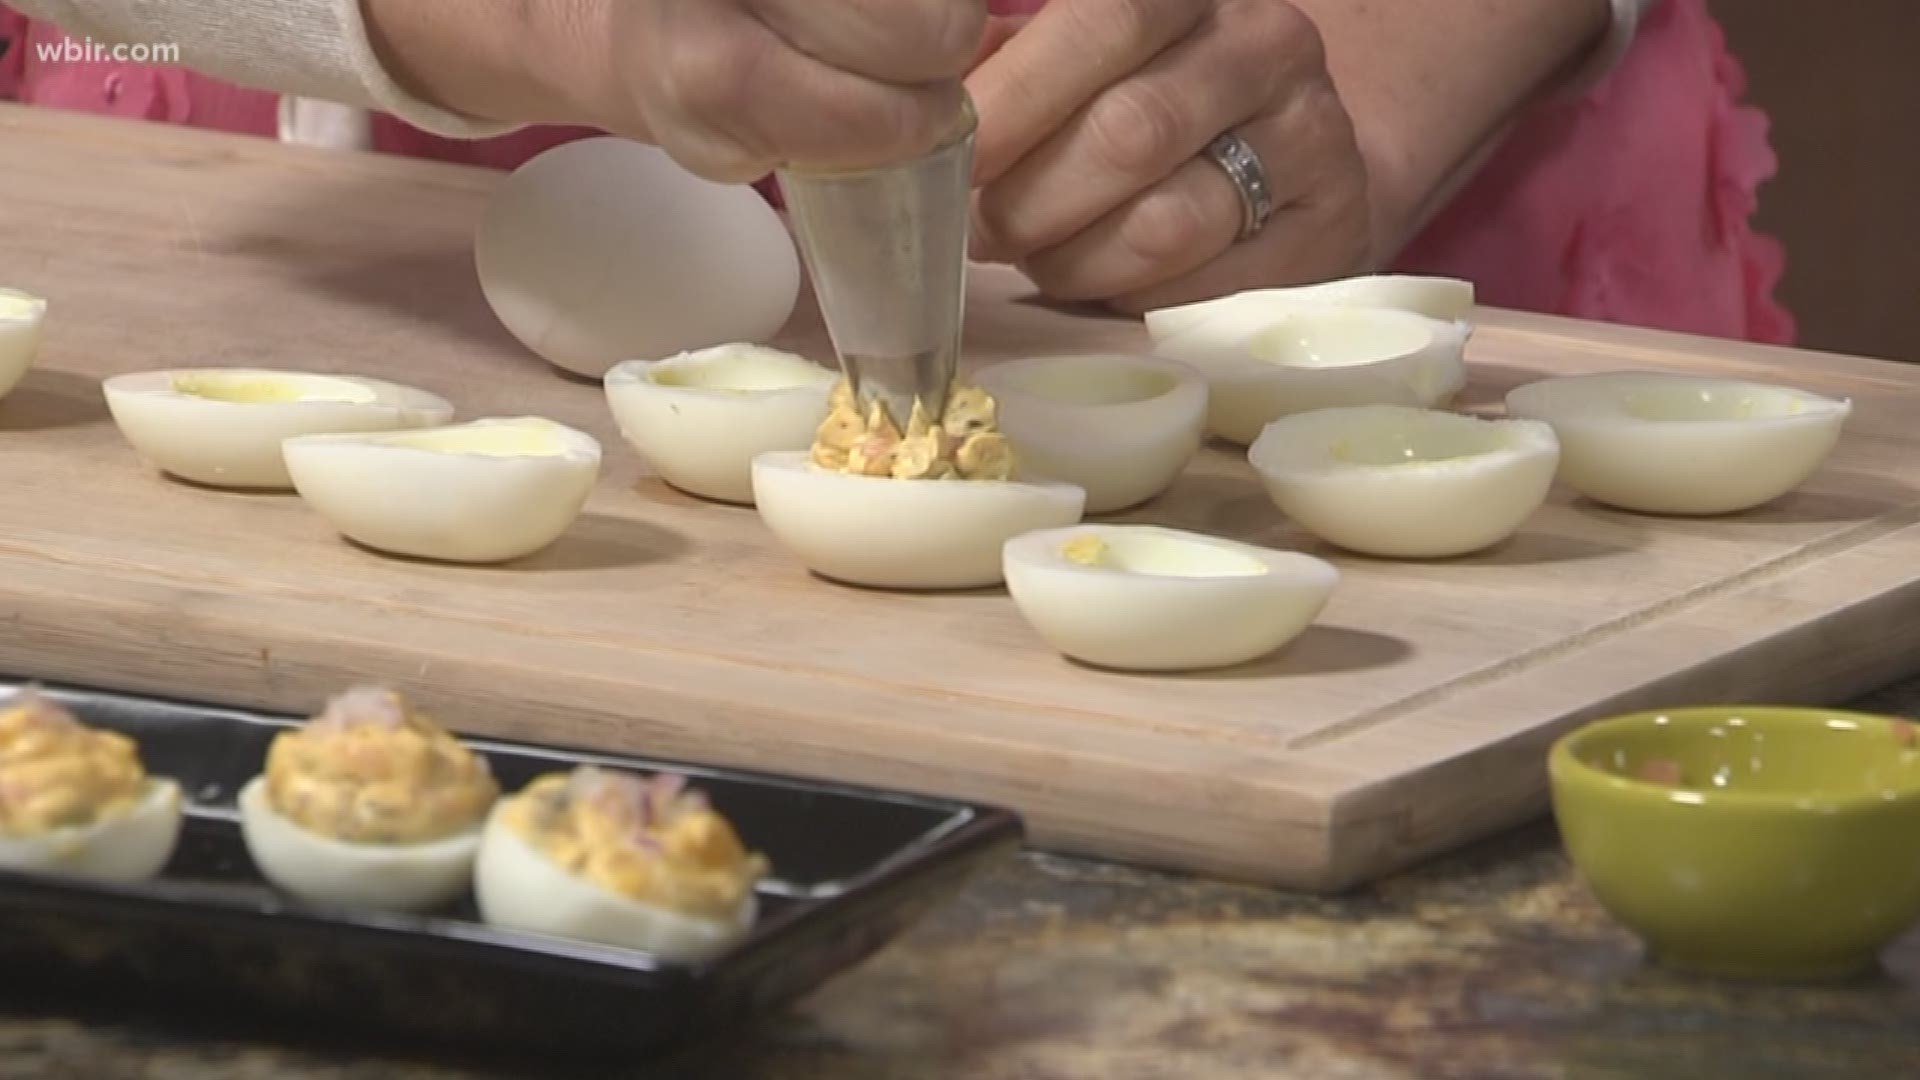 Mahasti Vafaie from The Tomato Head makes deviled eggs with smoked salmon.